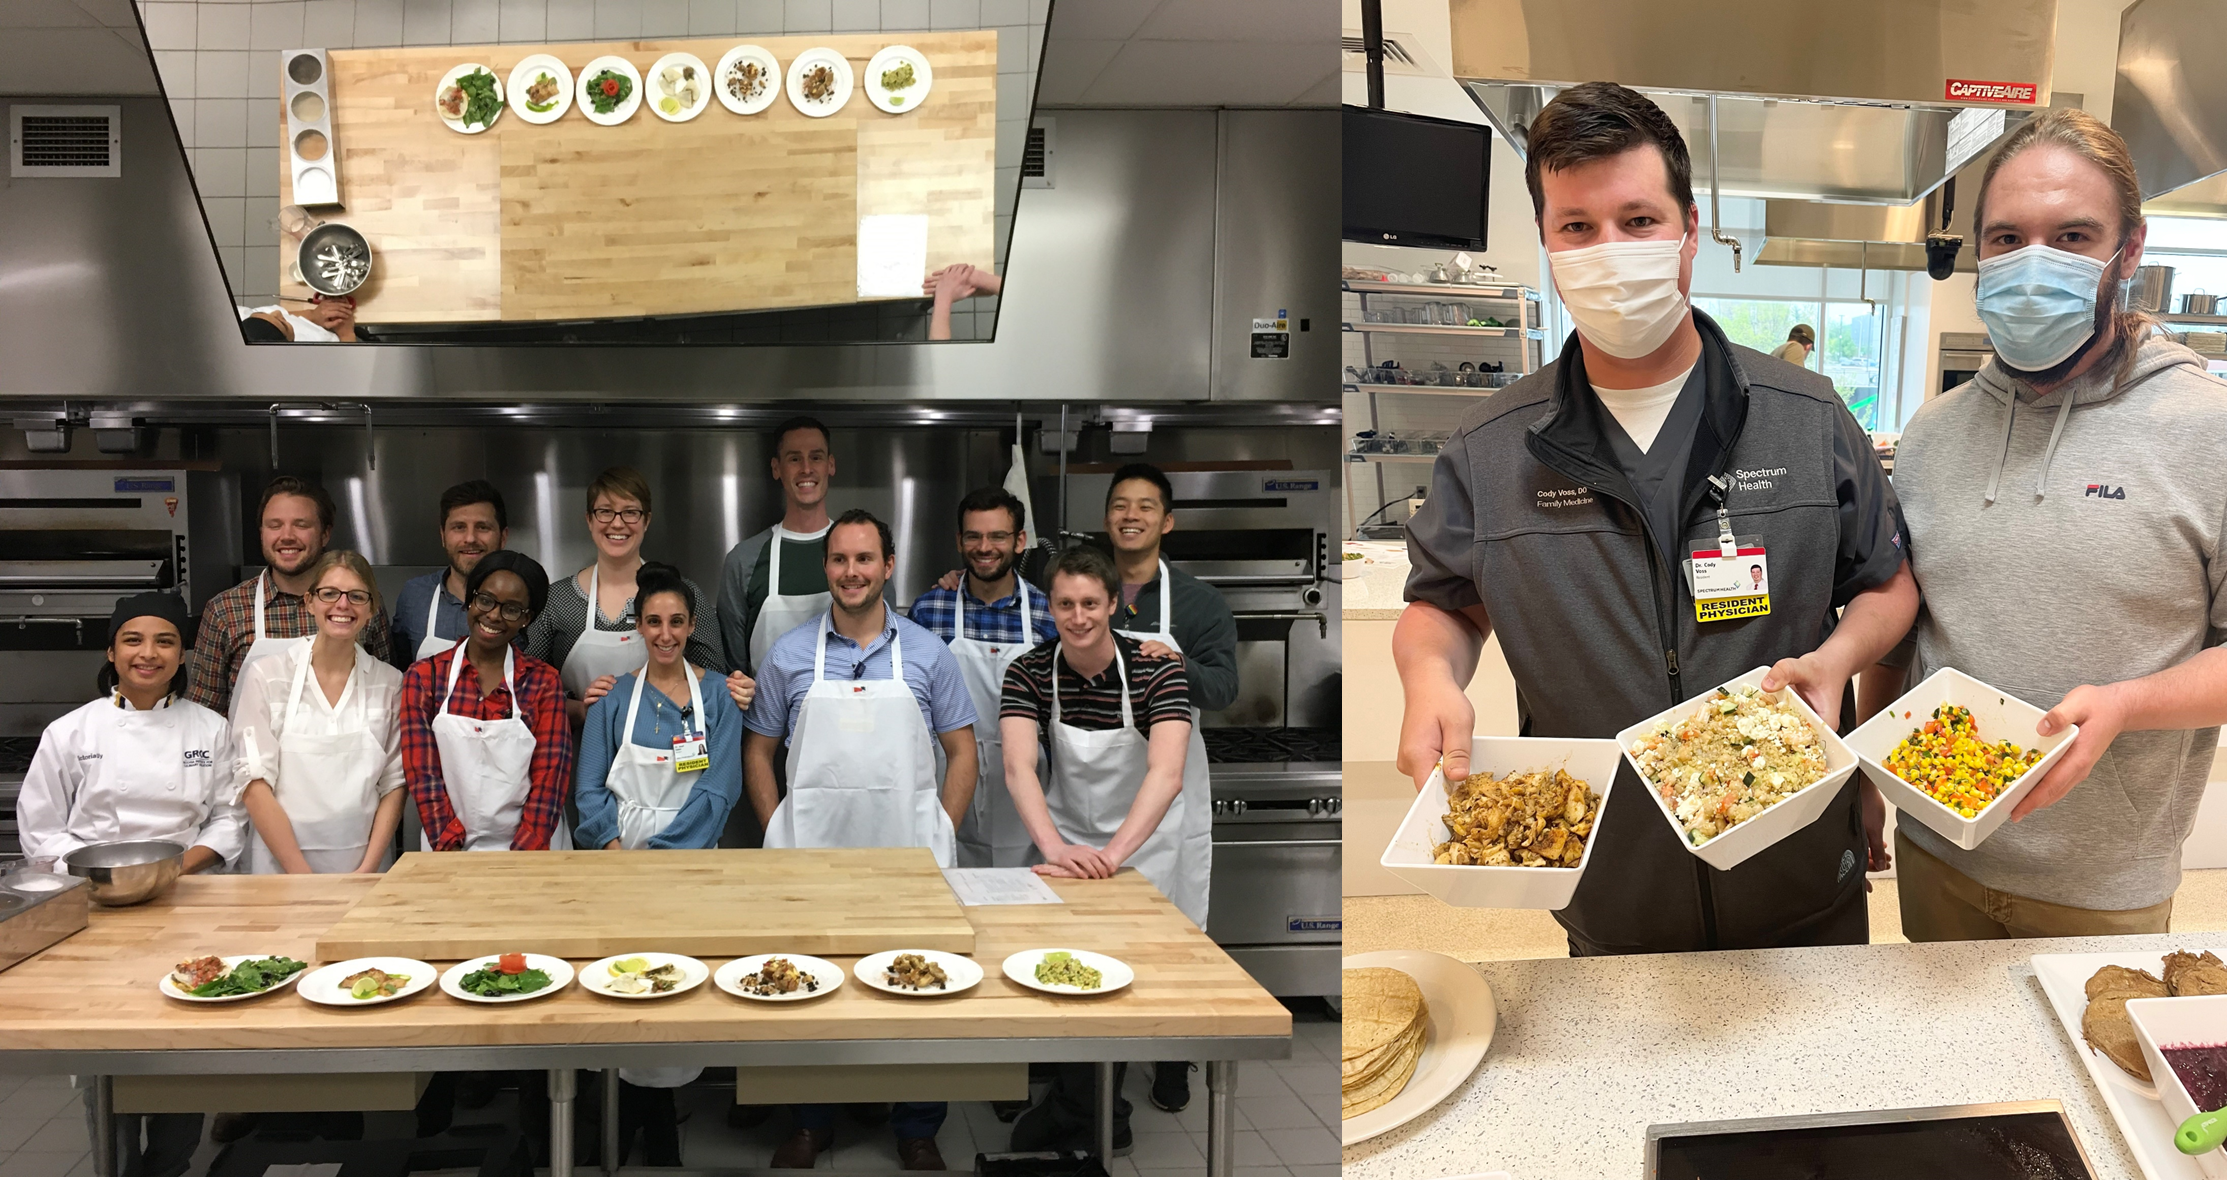 Two photos of residents learning during culinary medicine curriculum